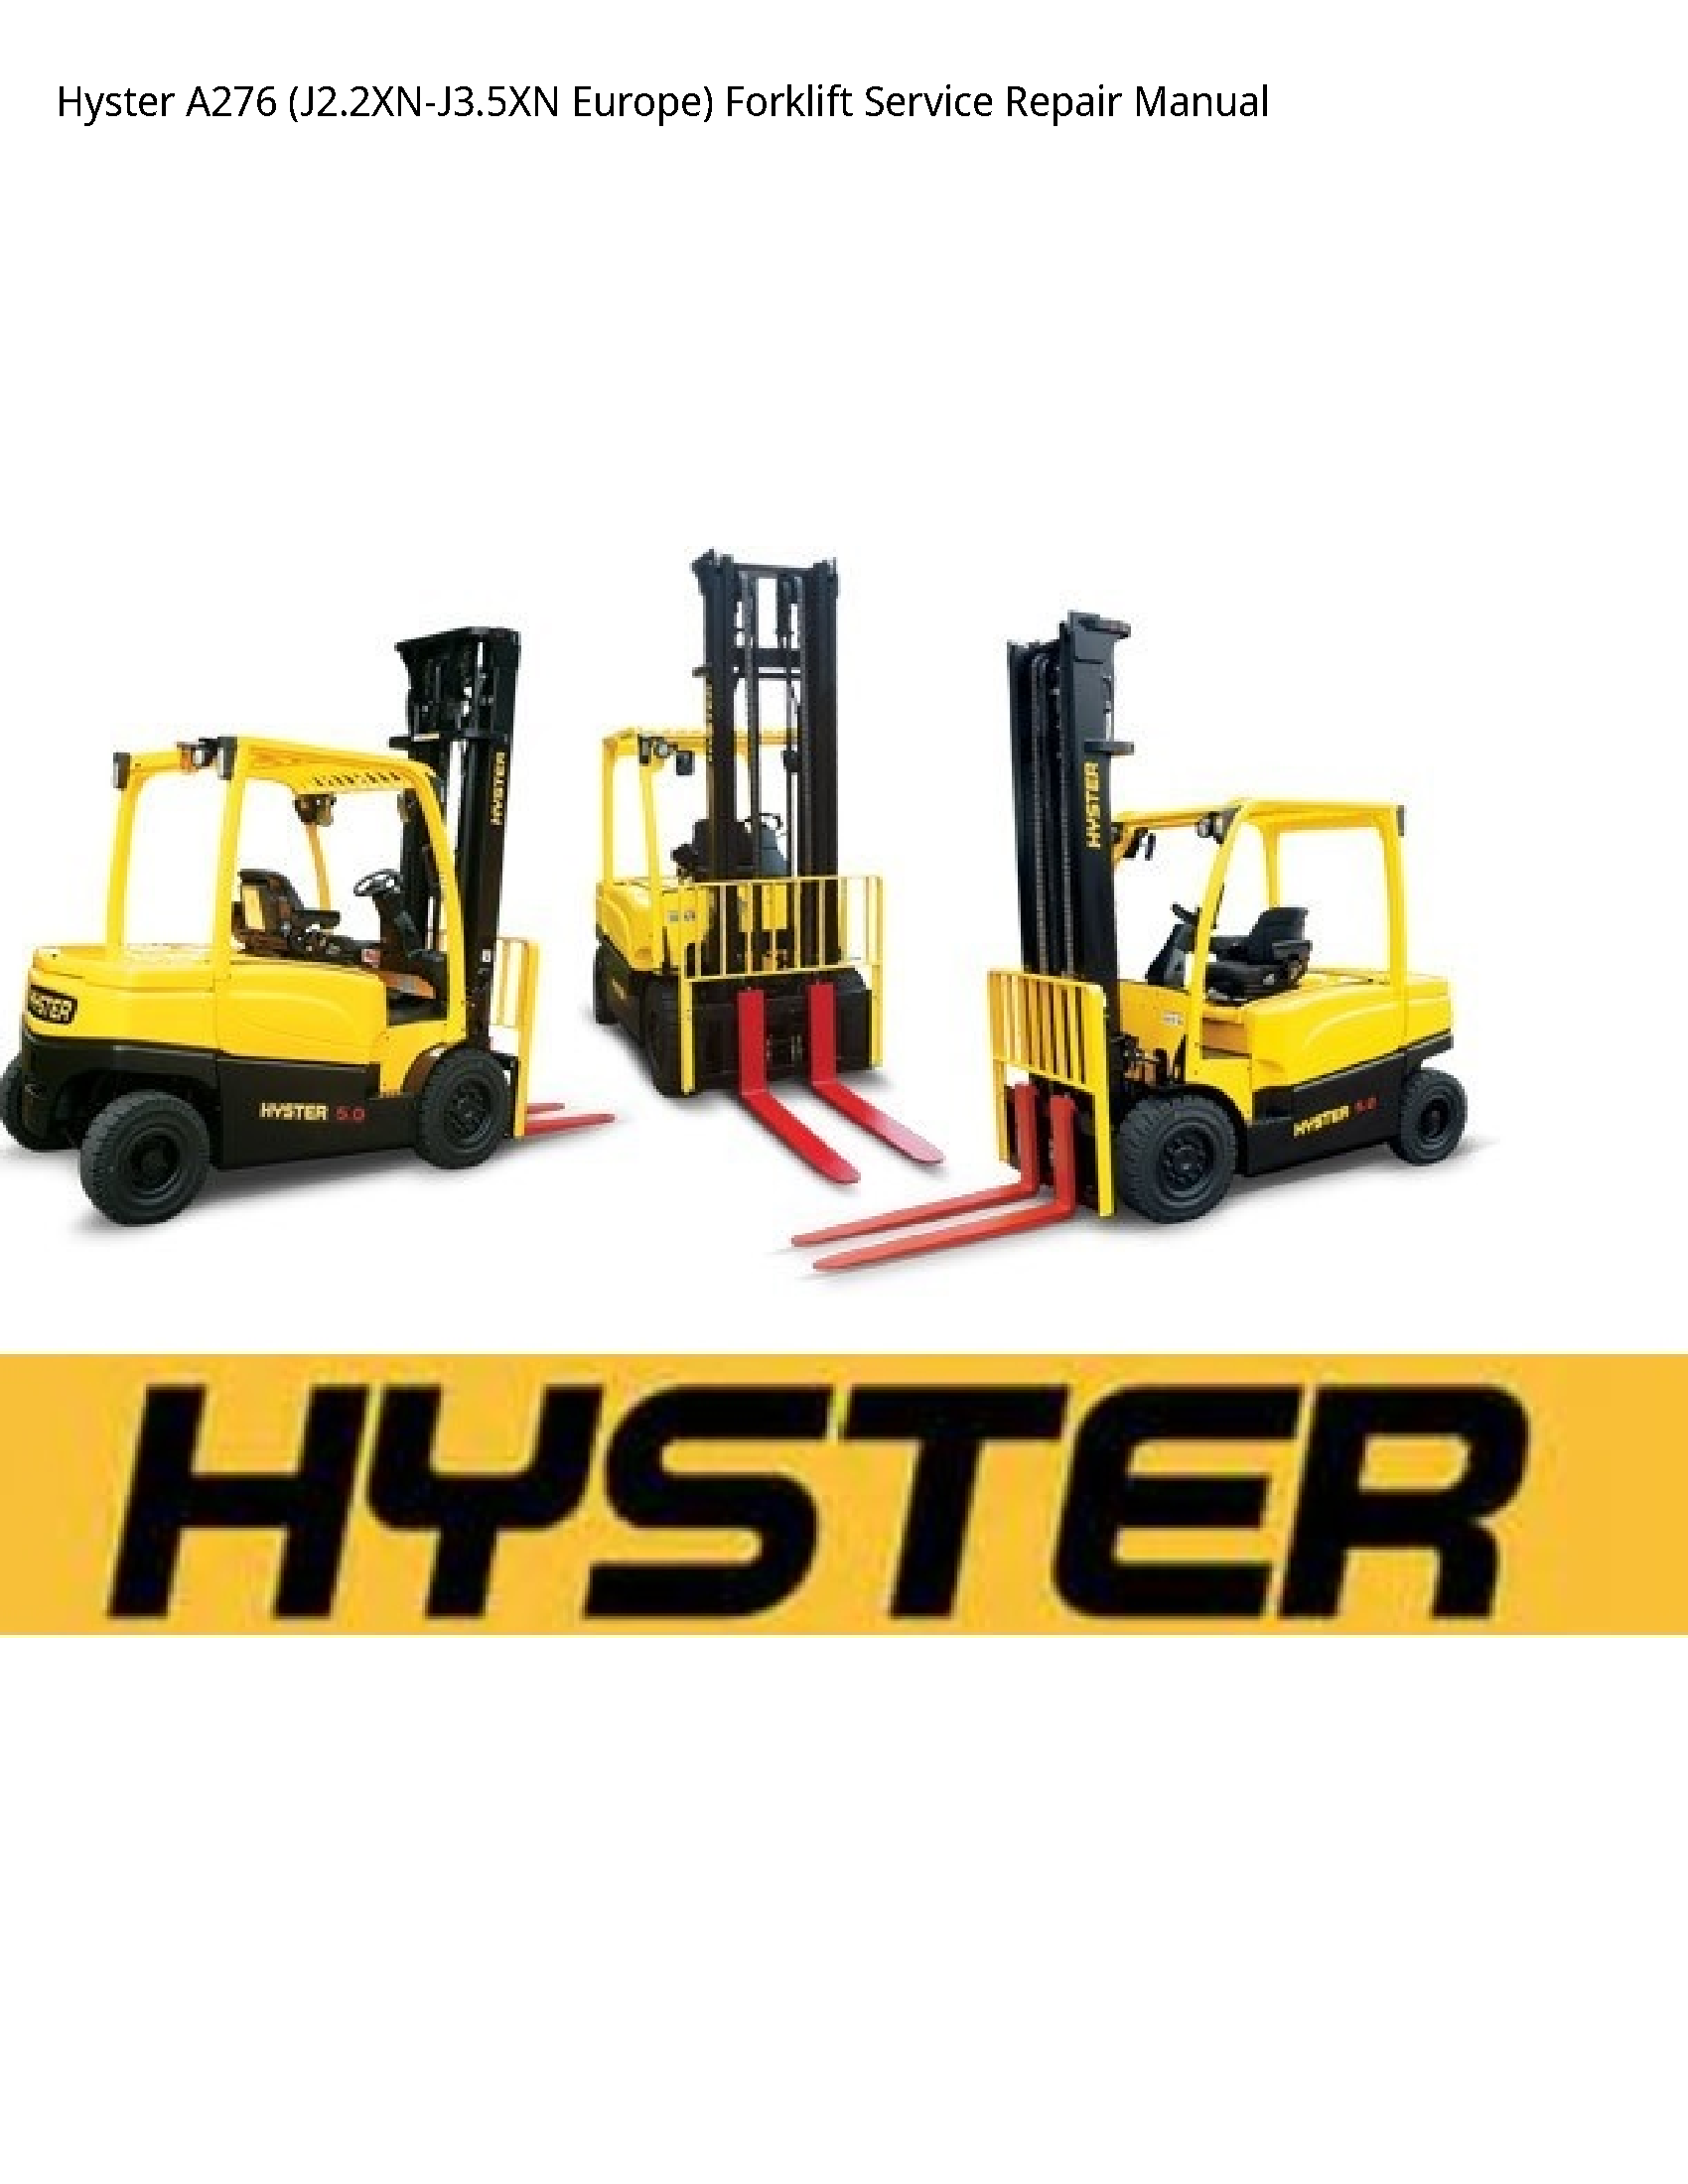 Hyster A276 Europe) Forklift manual